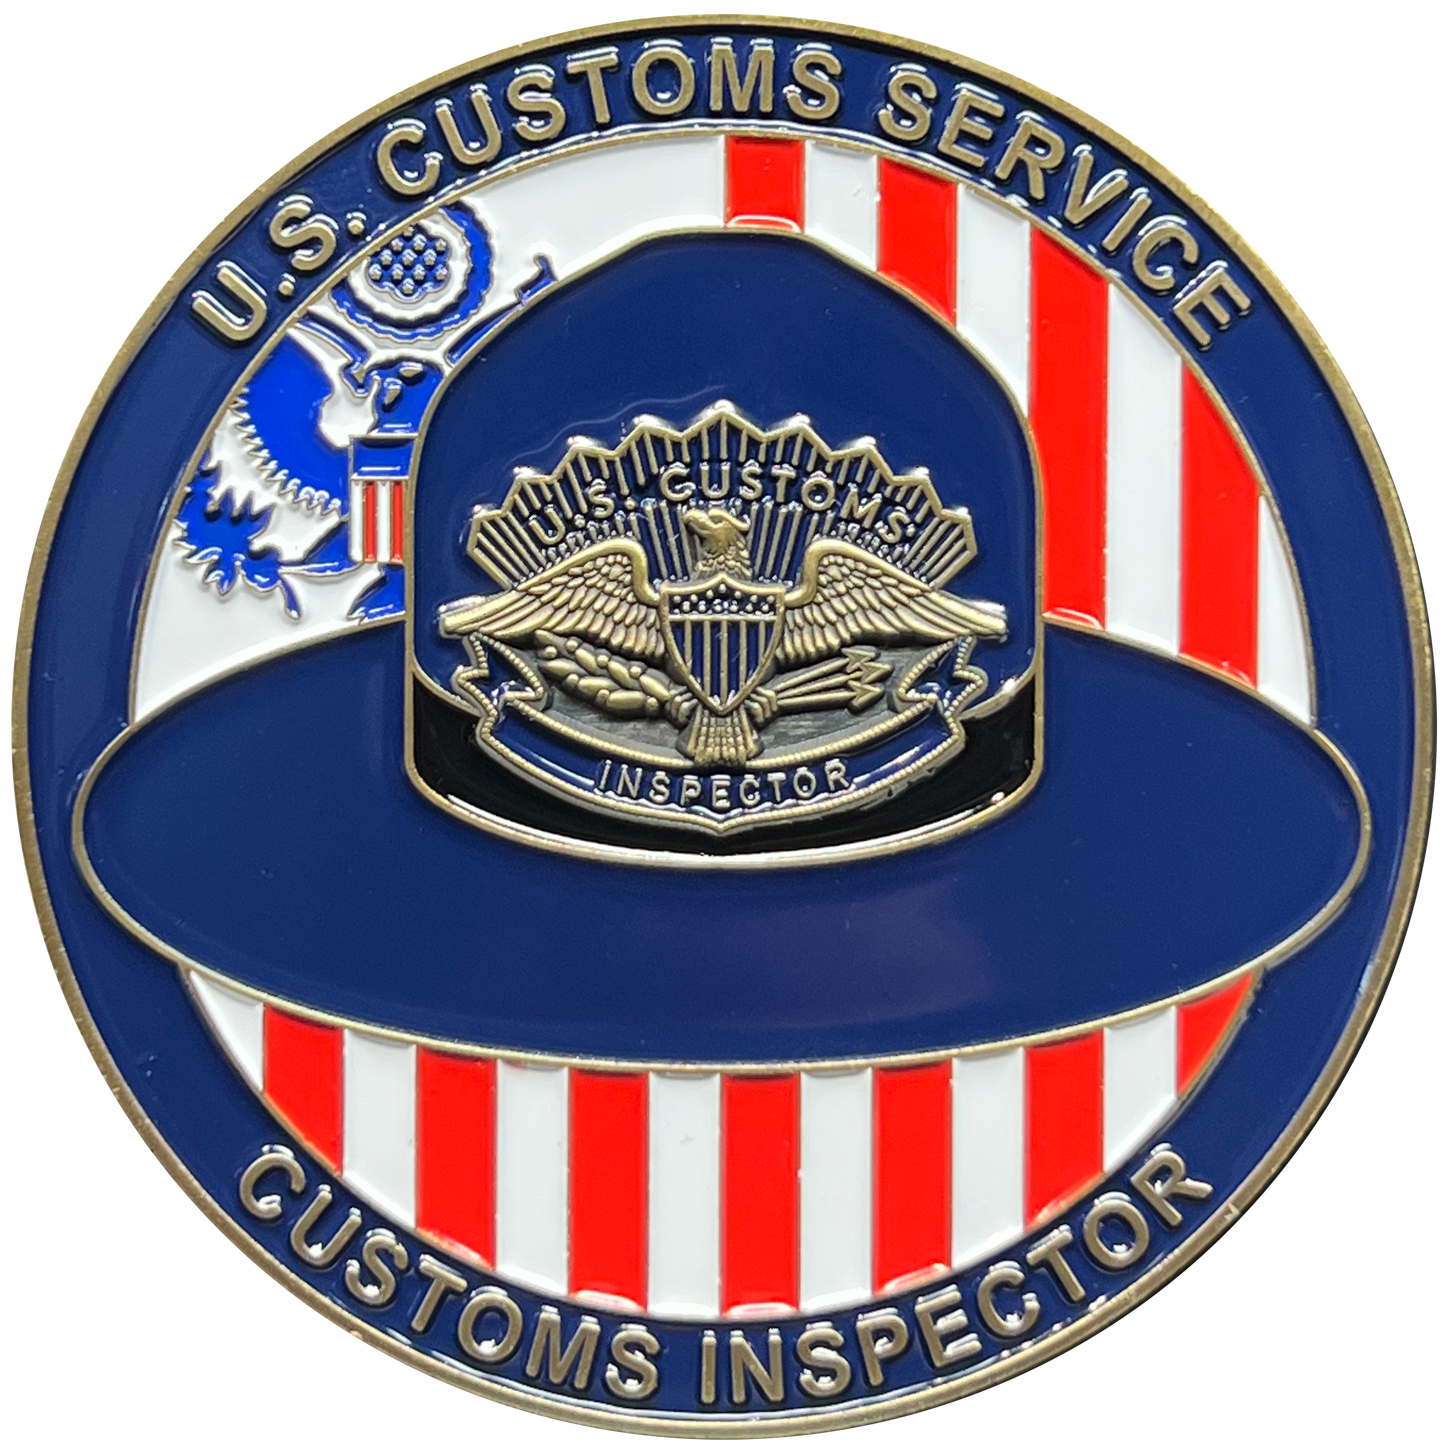 EL12-002 US Customs Inspector and Custom Patrol Officer Campaign Hat Challenge Coin before CBP USCS